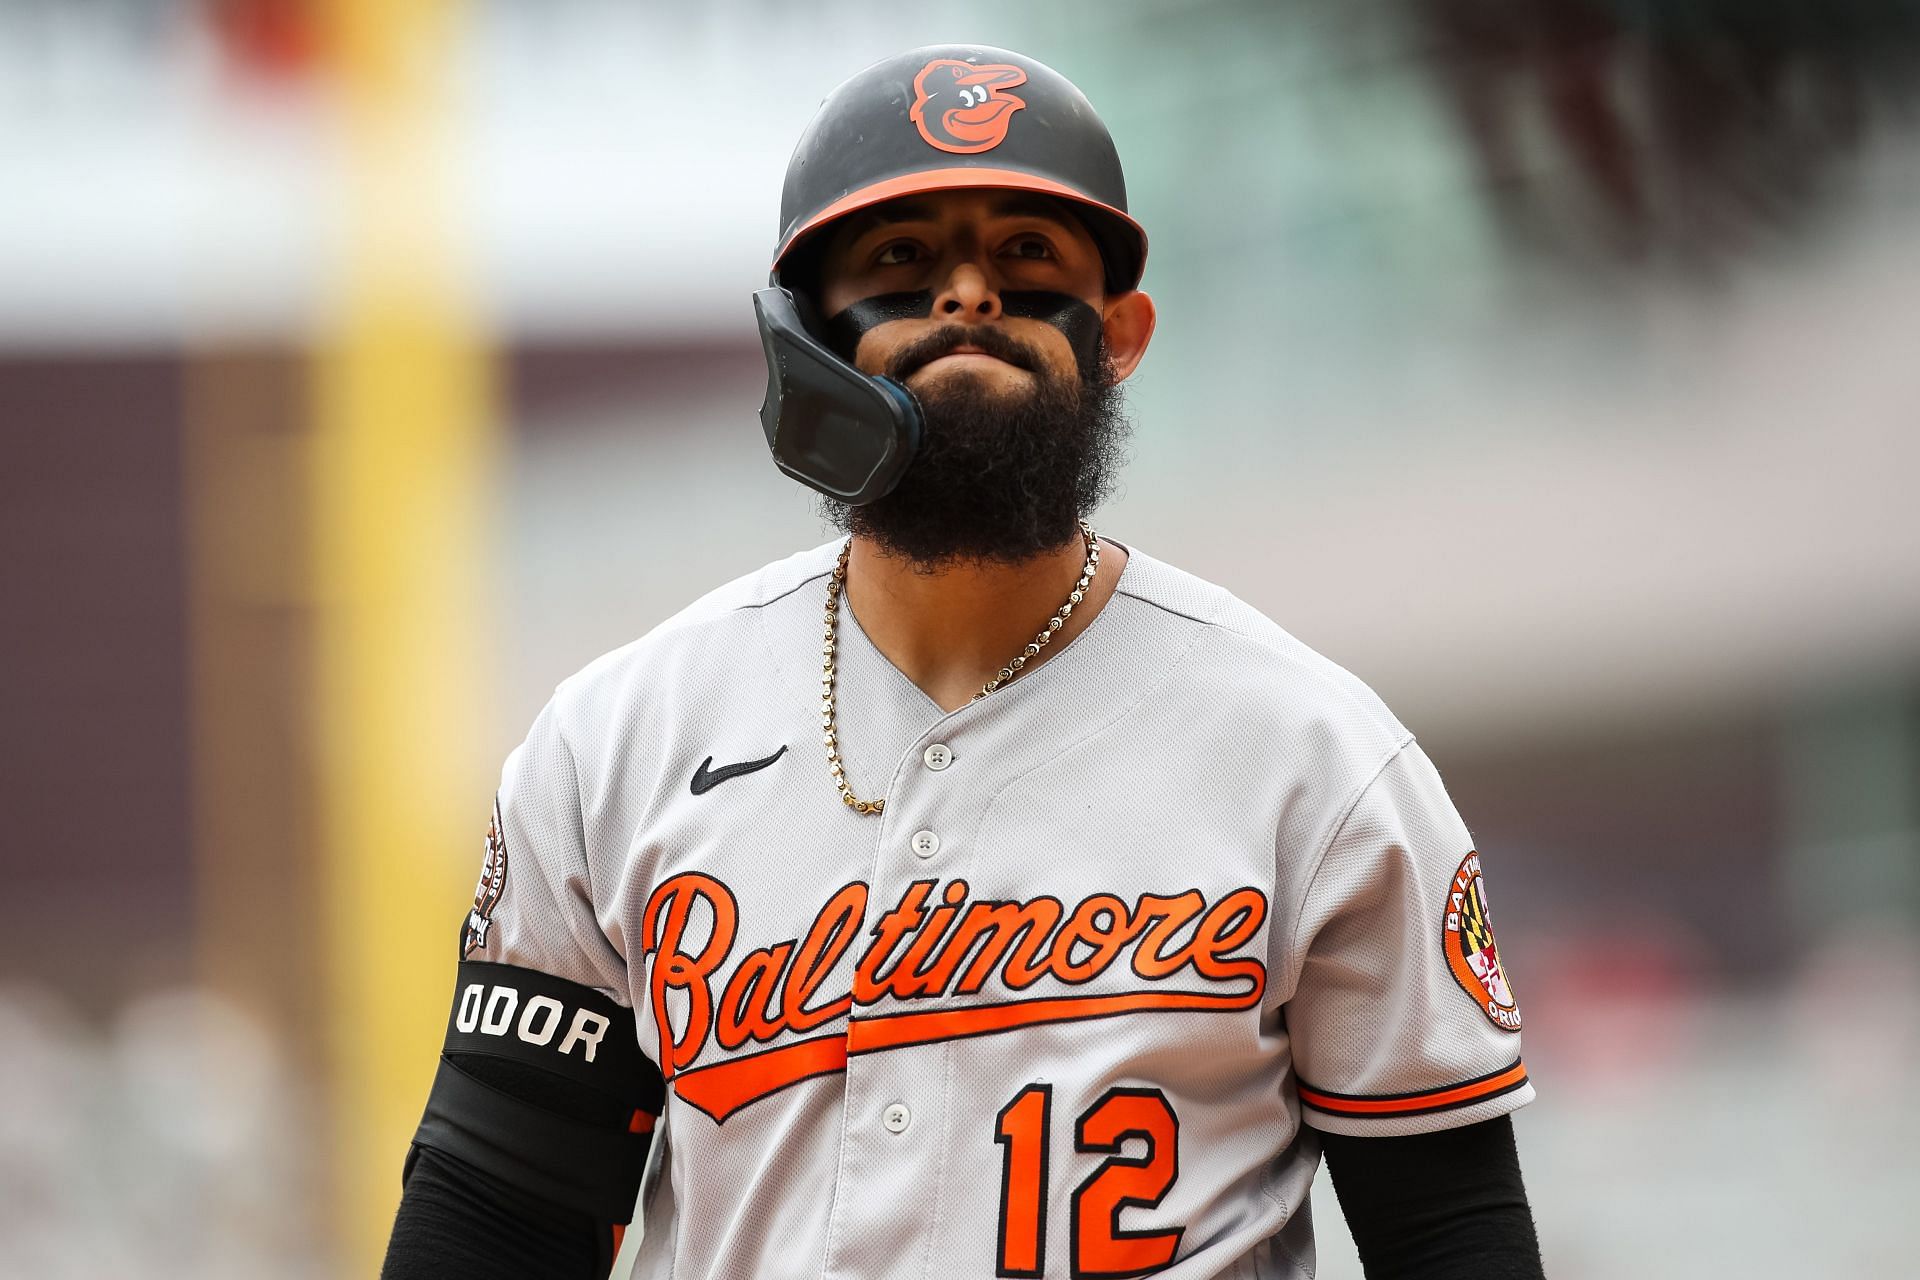 Baltimore Orioles infielder Rougned Odor is batting just .206 this season, but he looked sleek tonight against the Texas Rangers.